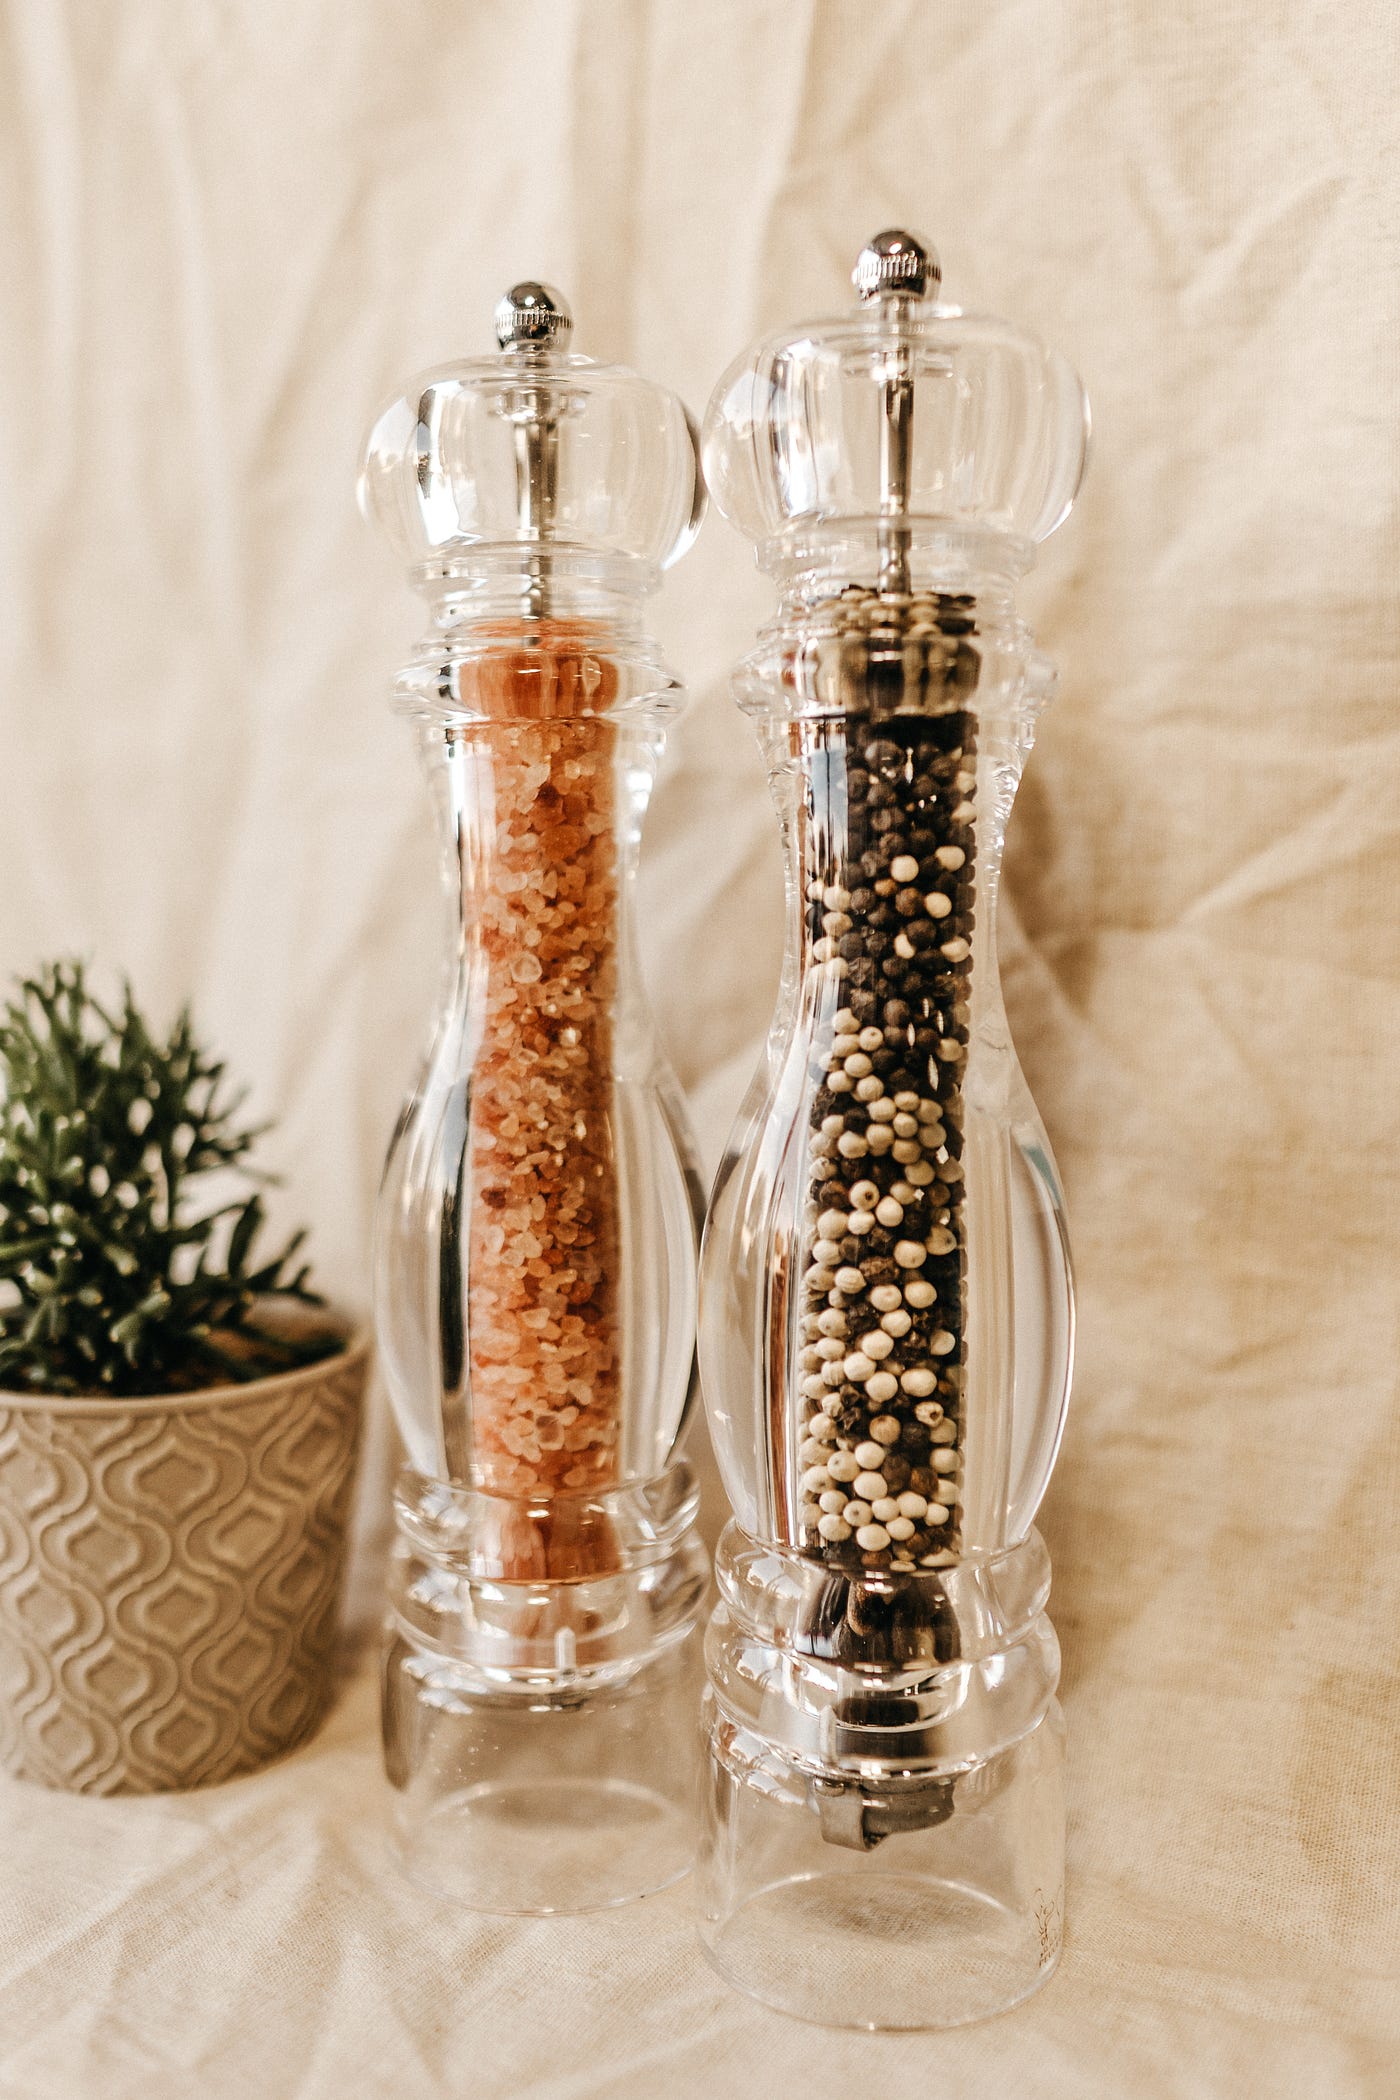 Why We Always Put Salt And Pepper On Our Dining Table | by René Junge |  ILLUMINATION | Medium